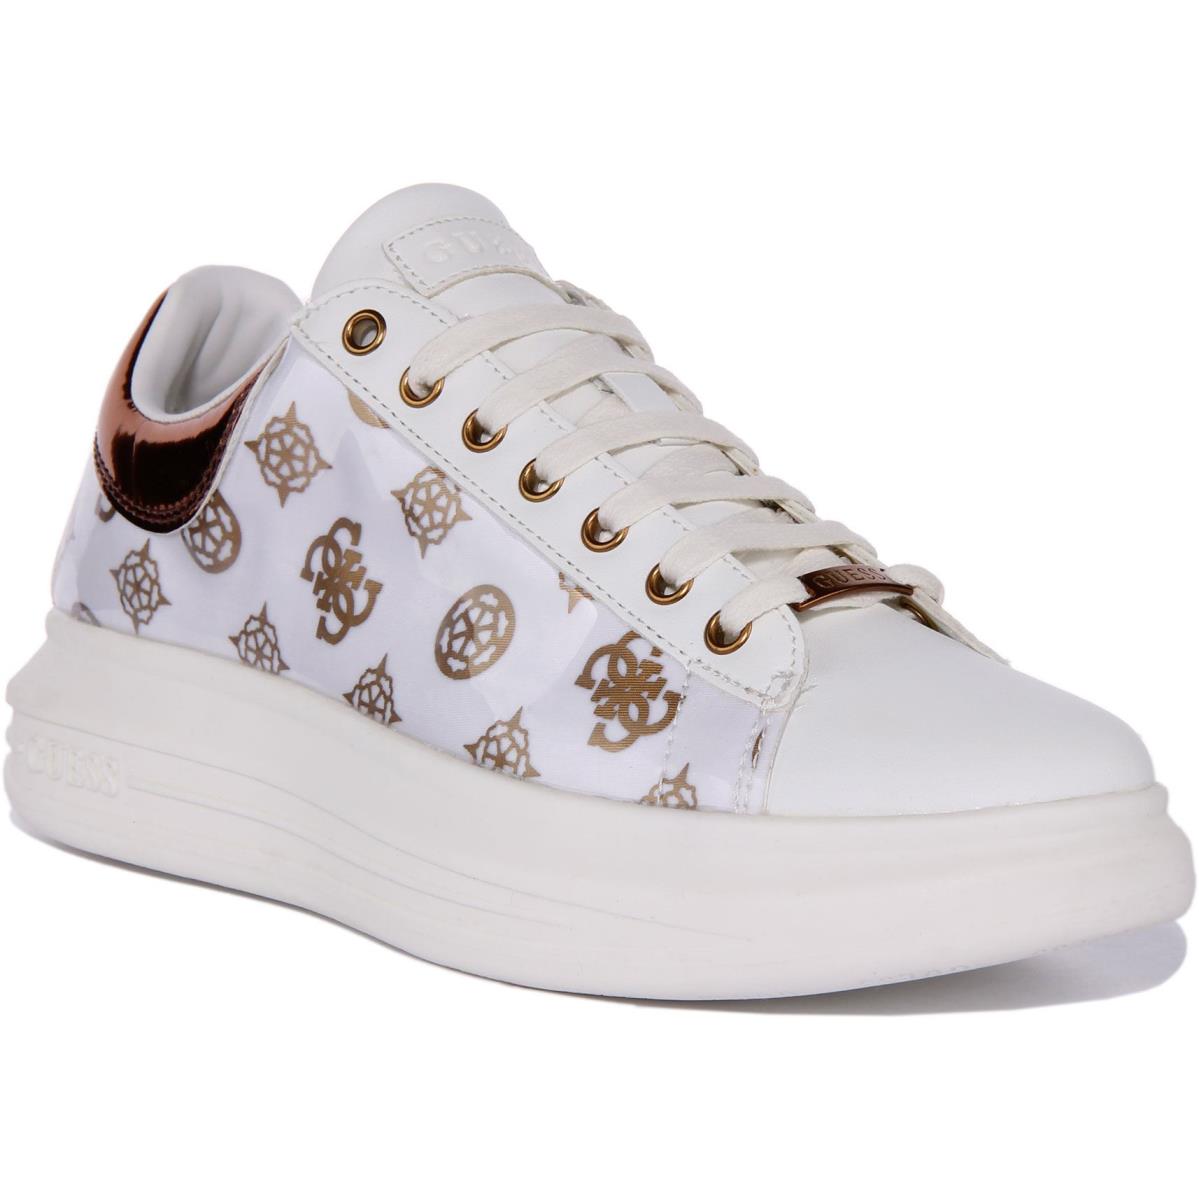 Guess Fl5Vibfab12 Vibo Womens Lace Up Sneakers In White Bronze US Size 5 - 10 WHITE BRONZE